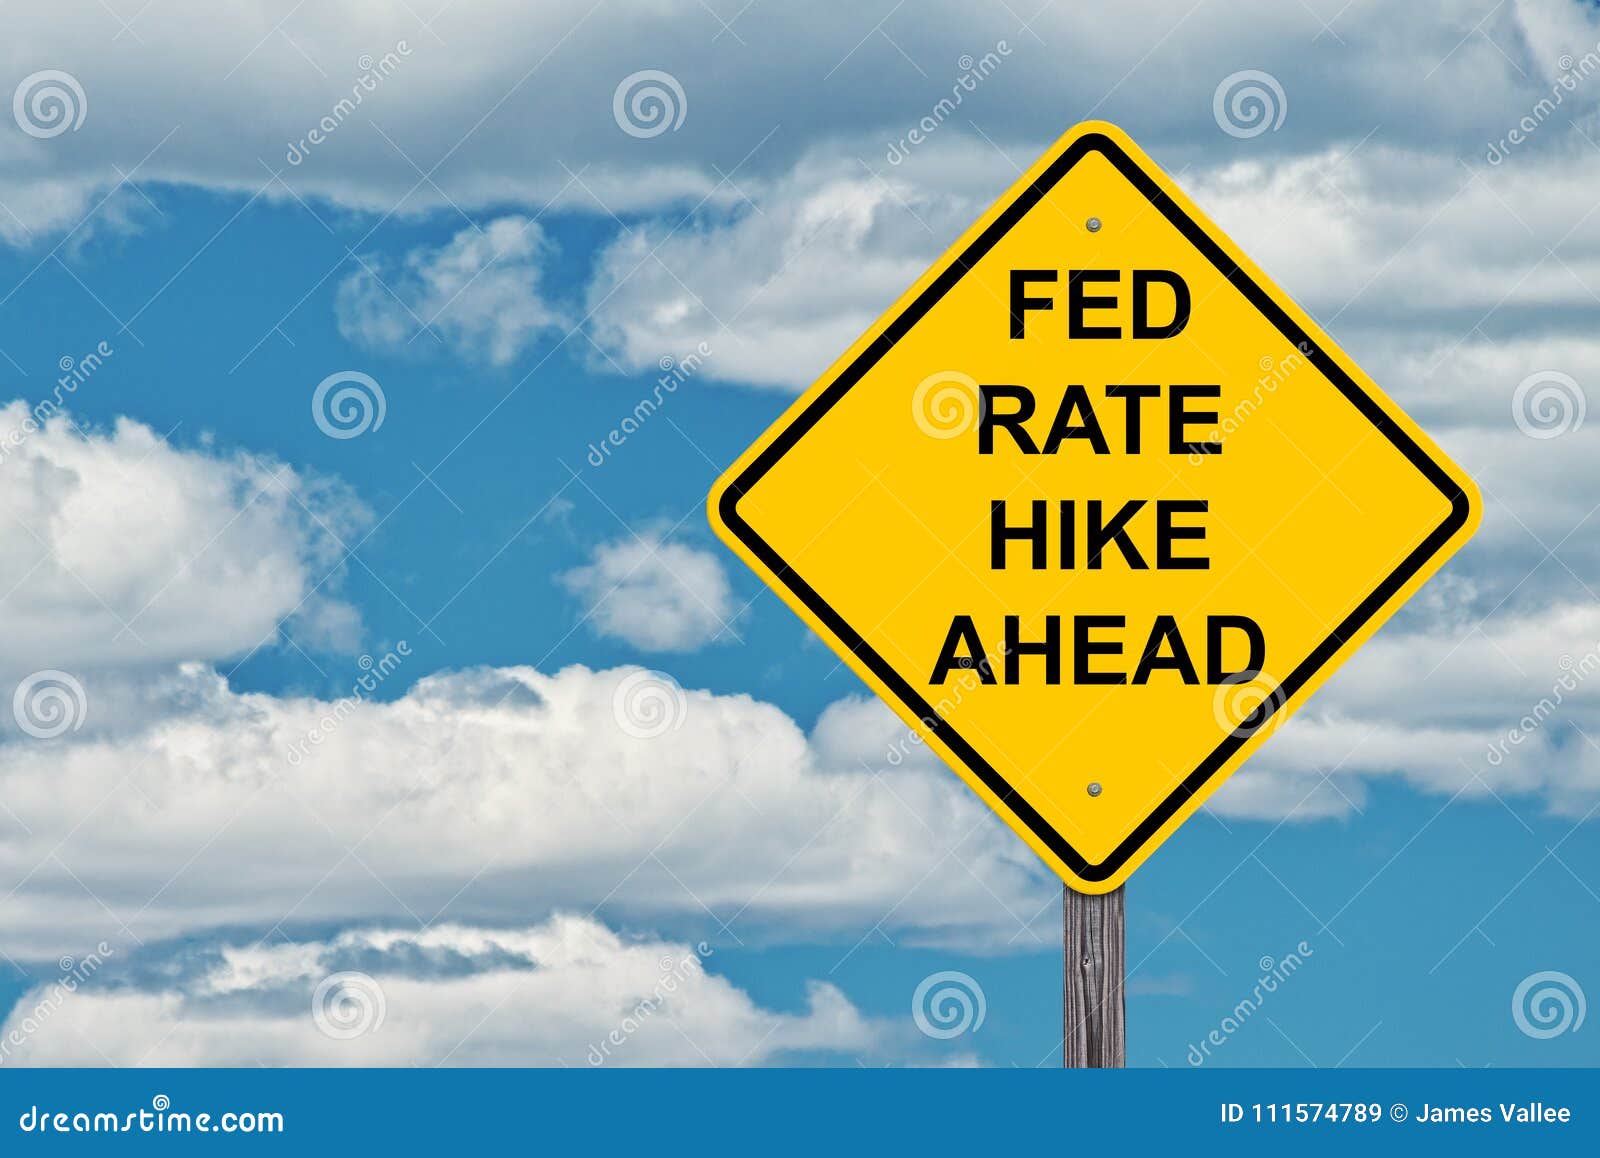 caution sign - fed rate hike ahead